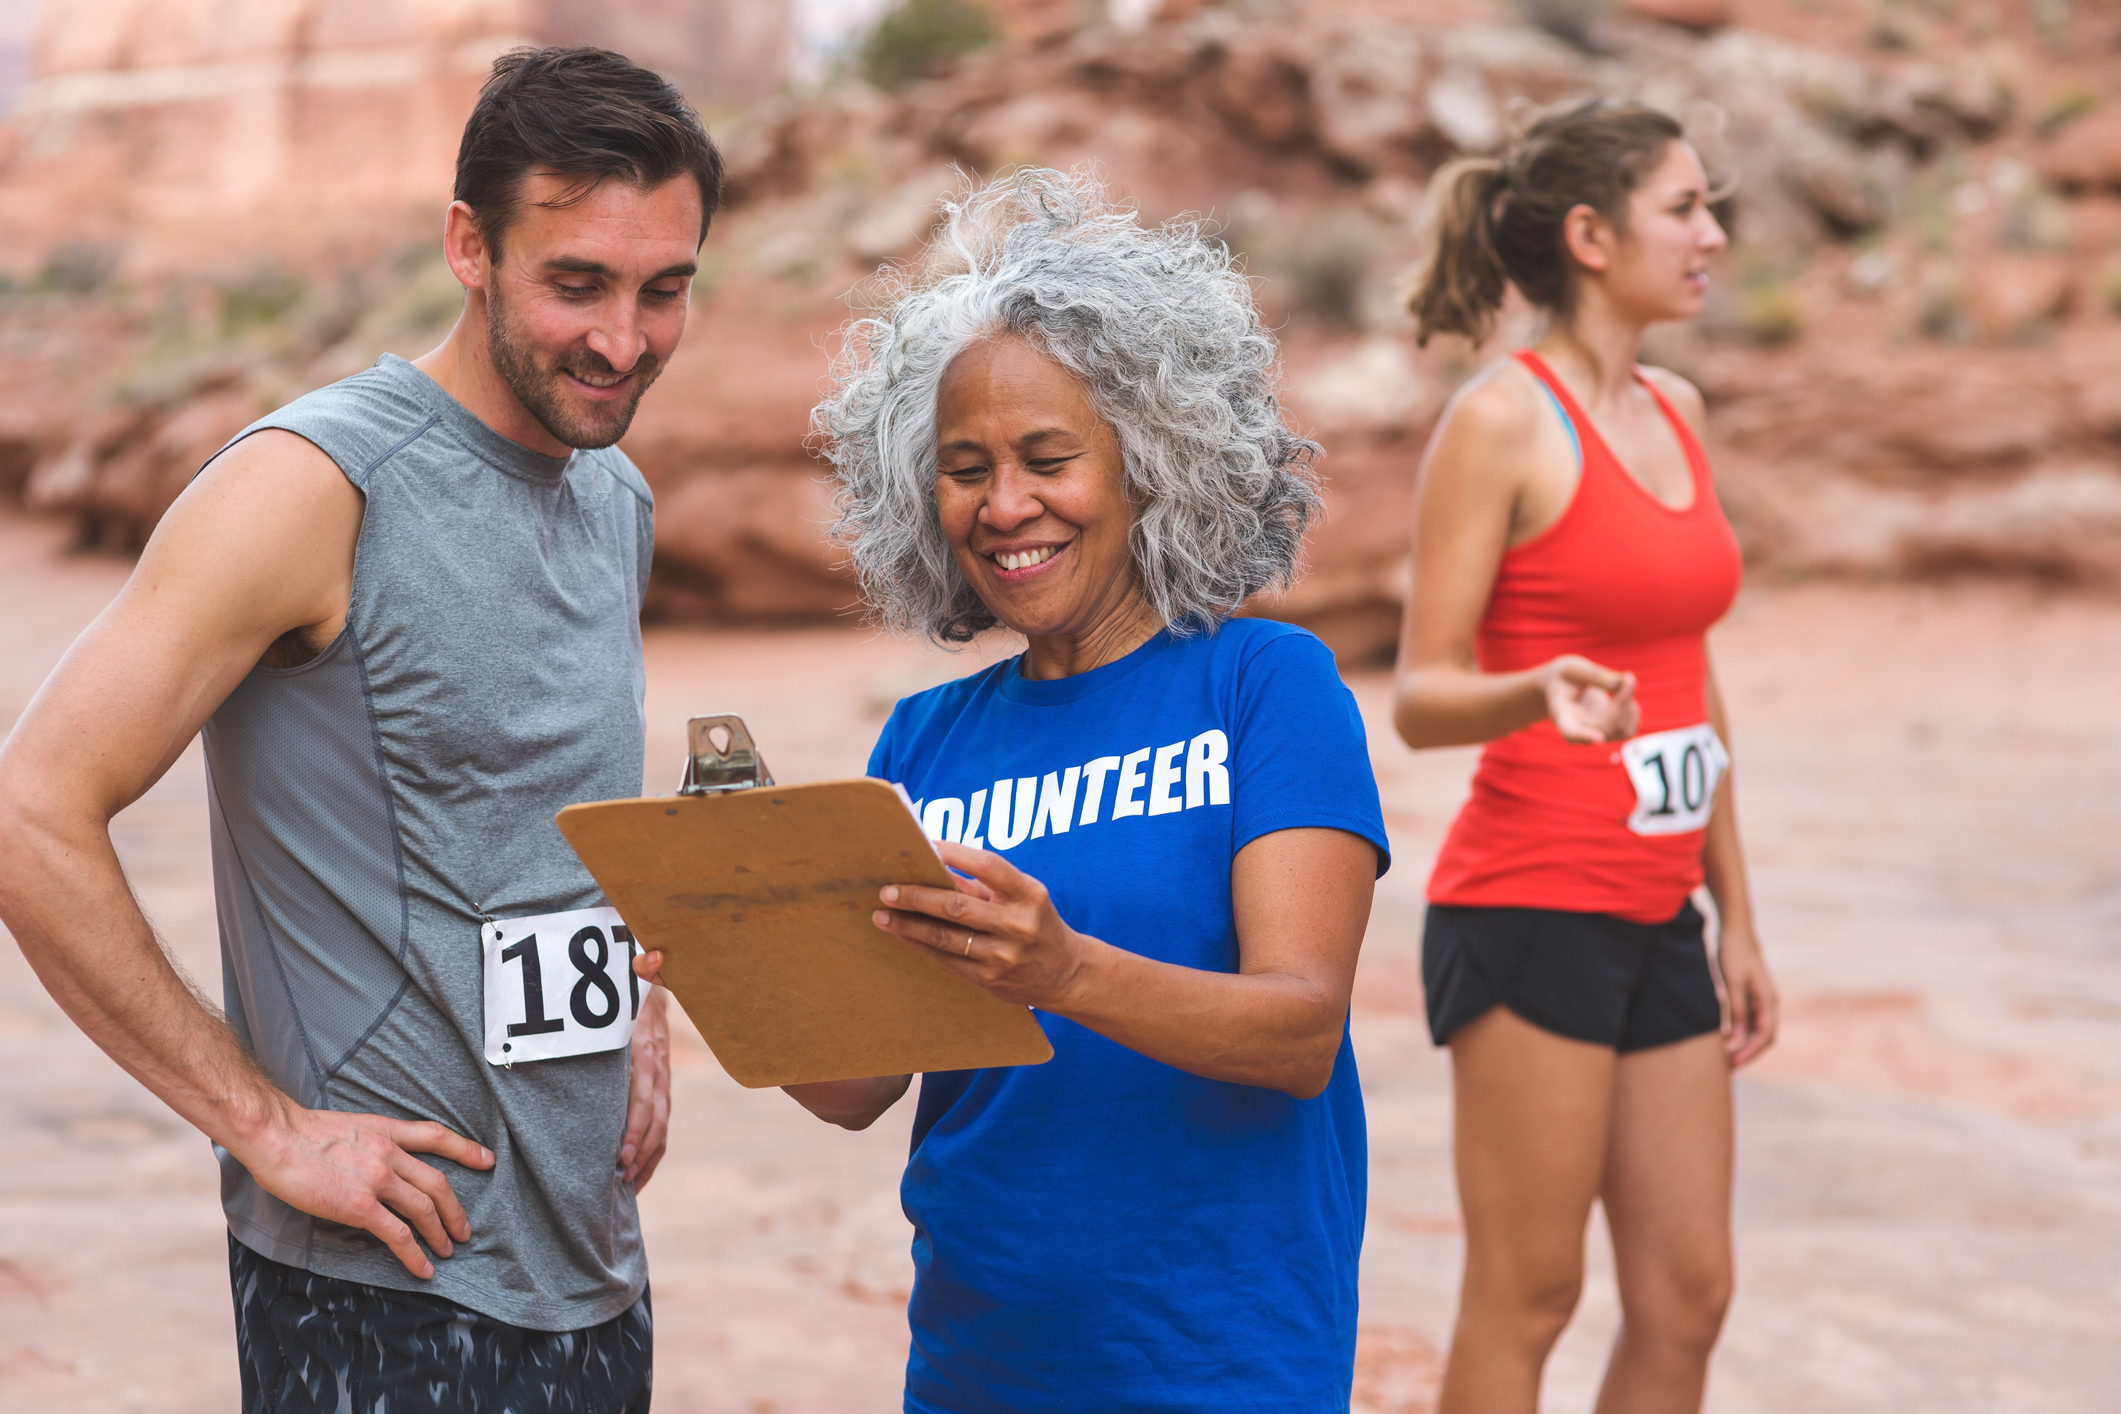 A volunteer with a clipboard interacting with a runner